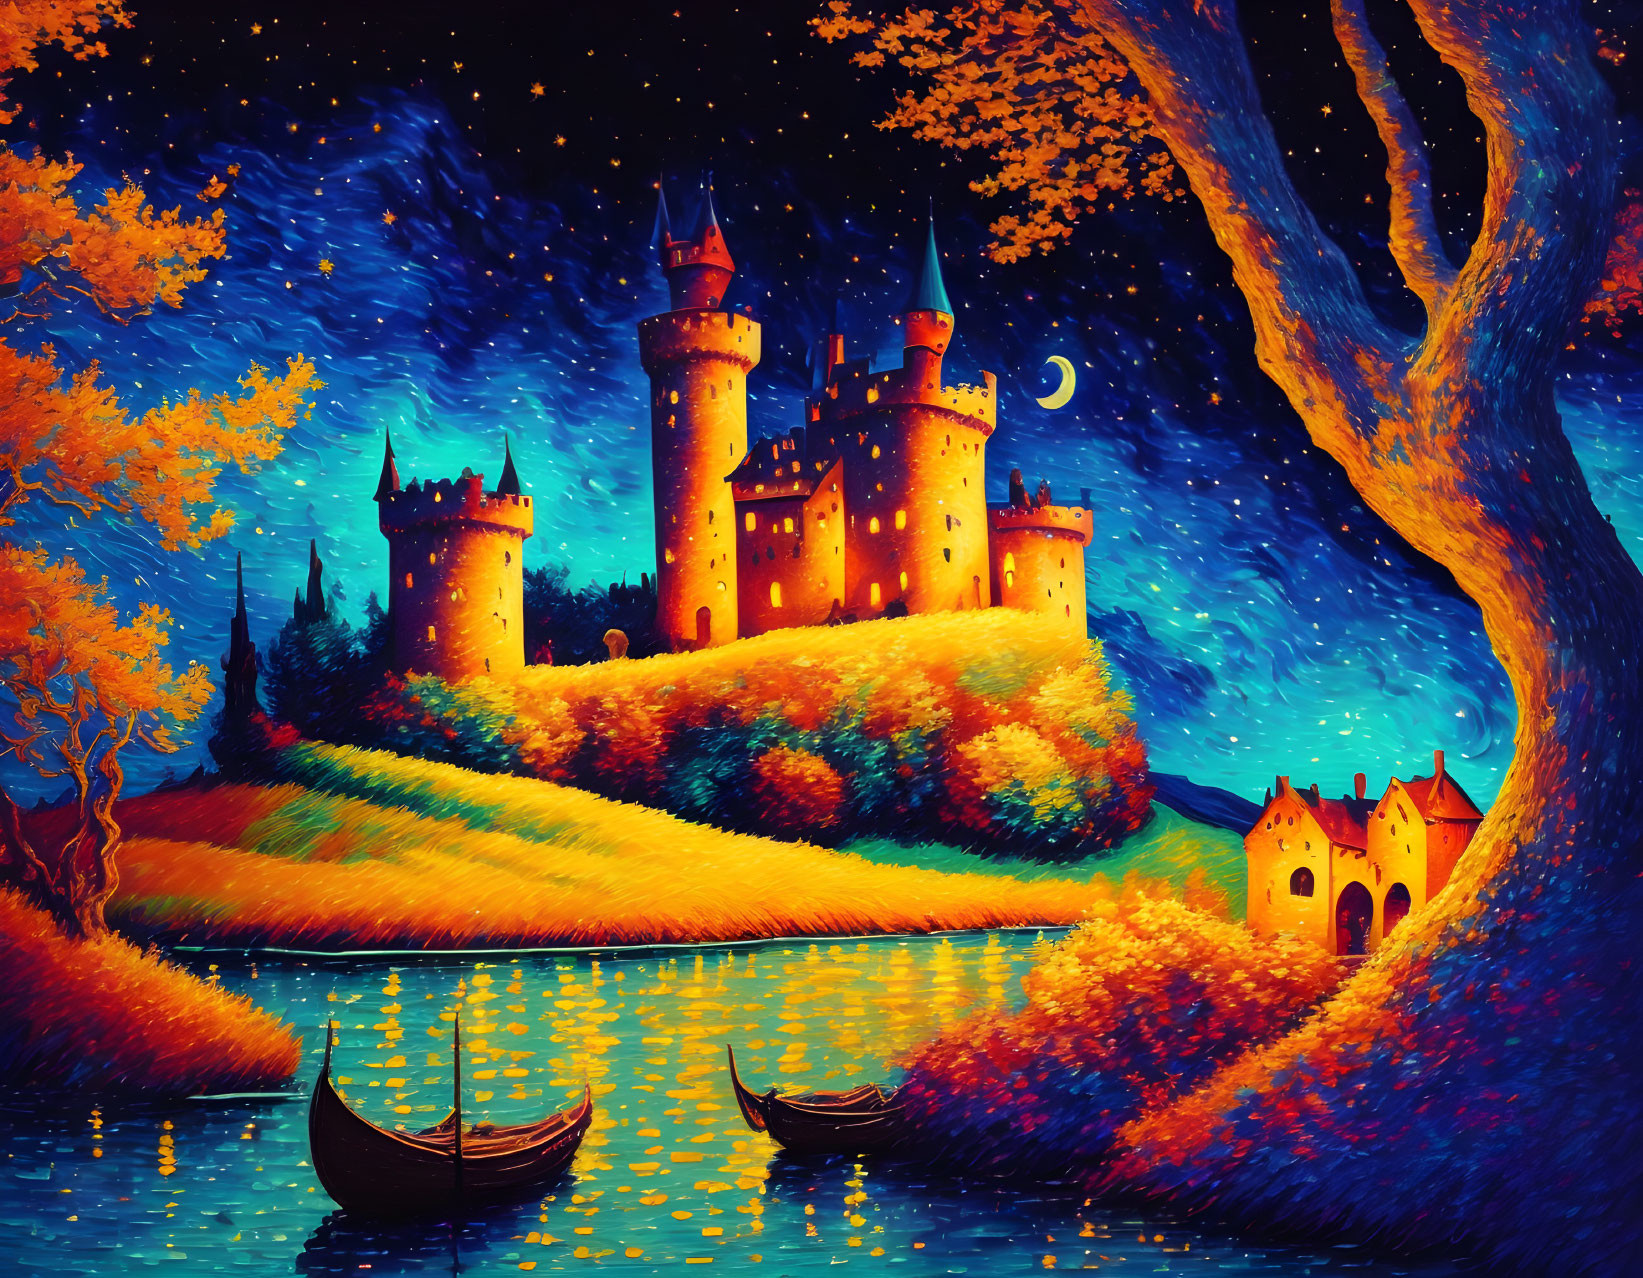 Fairytale castle painting: Night scene with glowing windows, autumn landscape, boats, starry sky